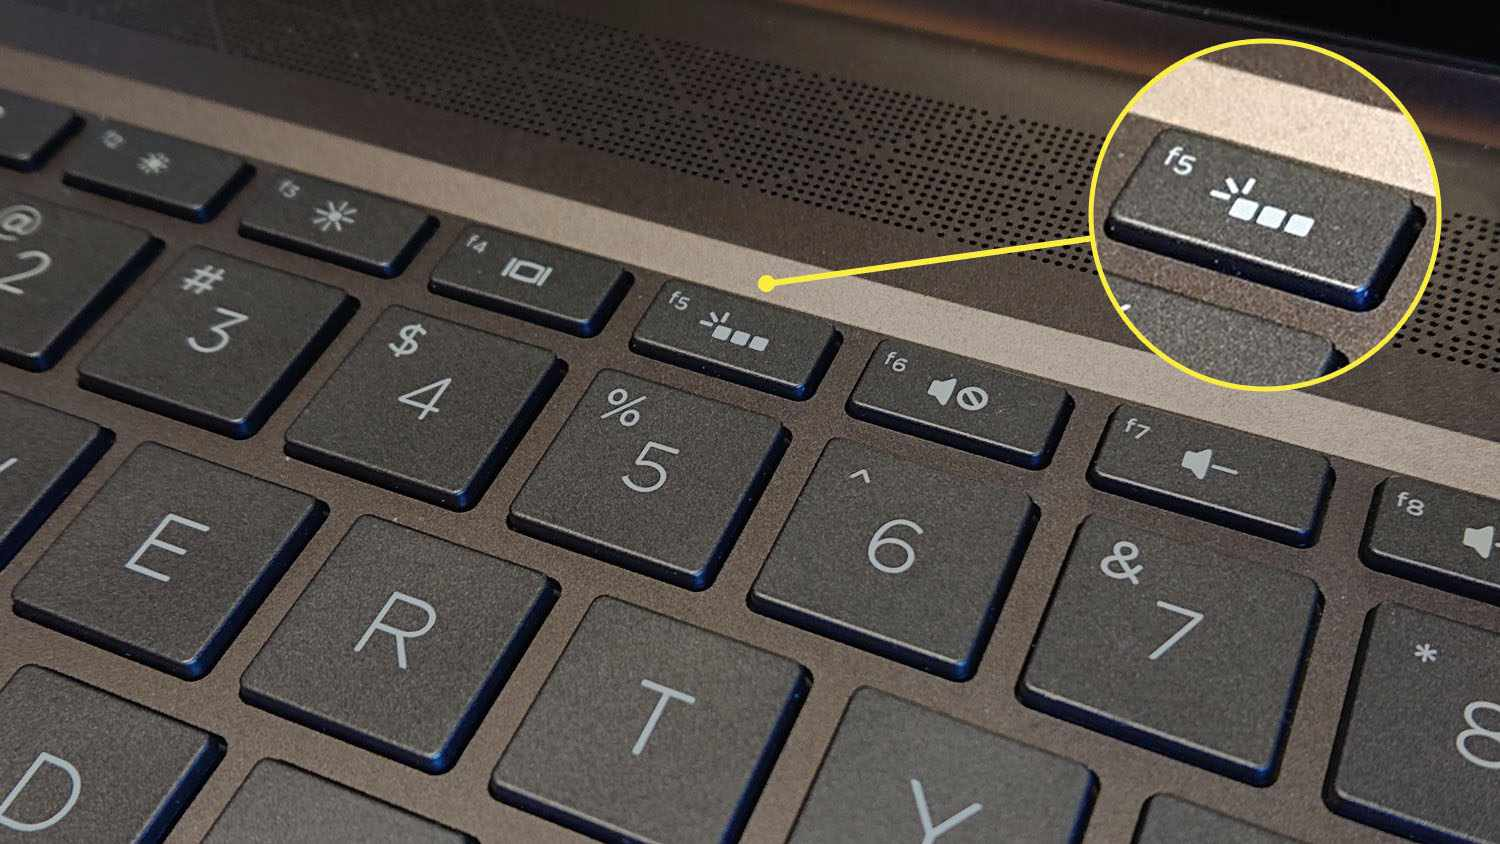 When connecting a wireless gaming keyboard to a windows laptop press the function key to get the laptop to pair with the keyboard. 